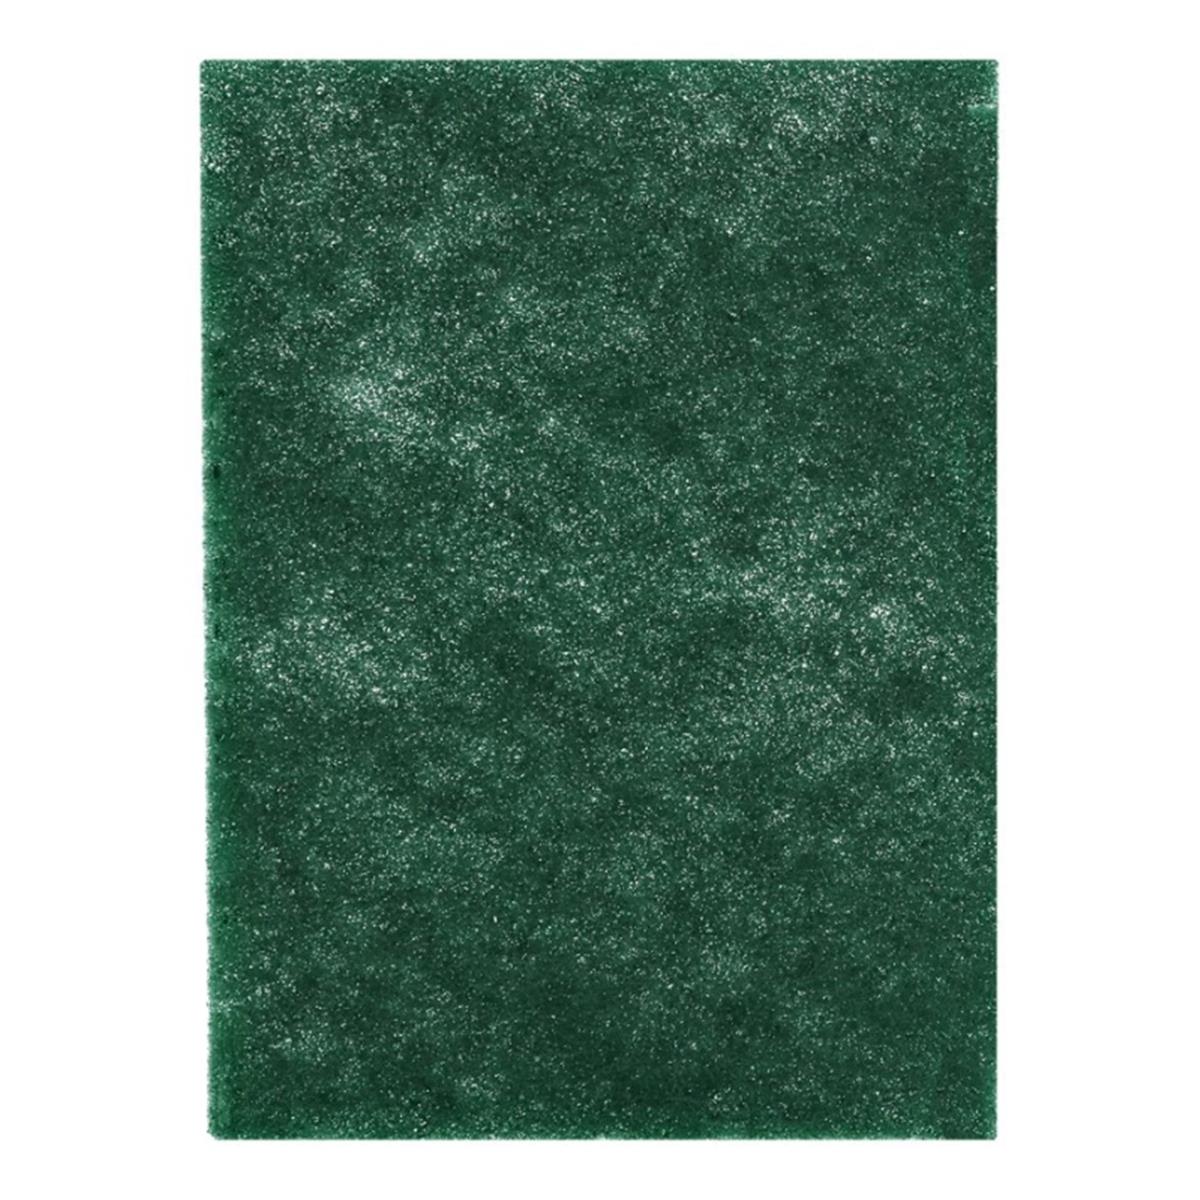 Picture of Freud America 1017564 220 Grit Final Stripping Pad